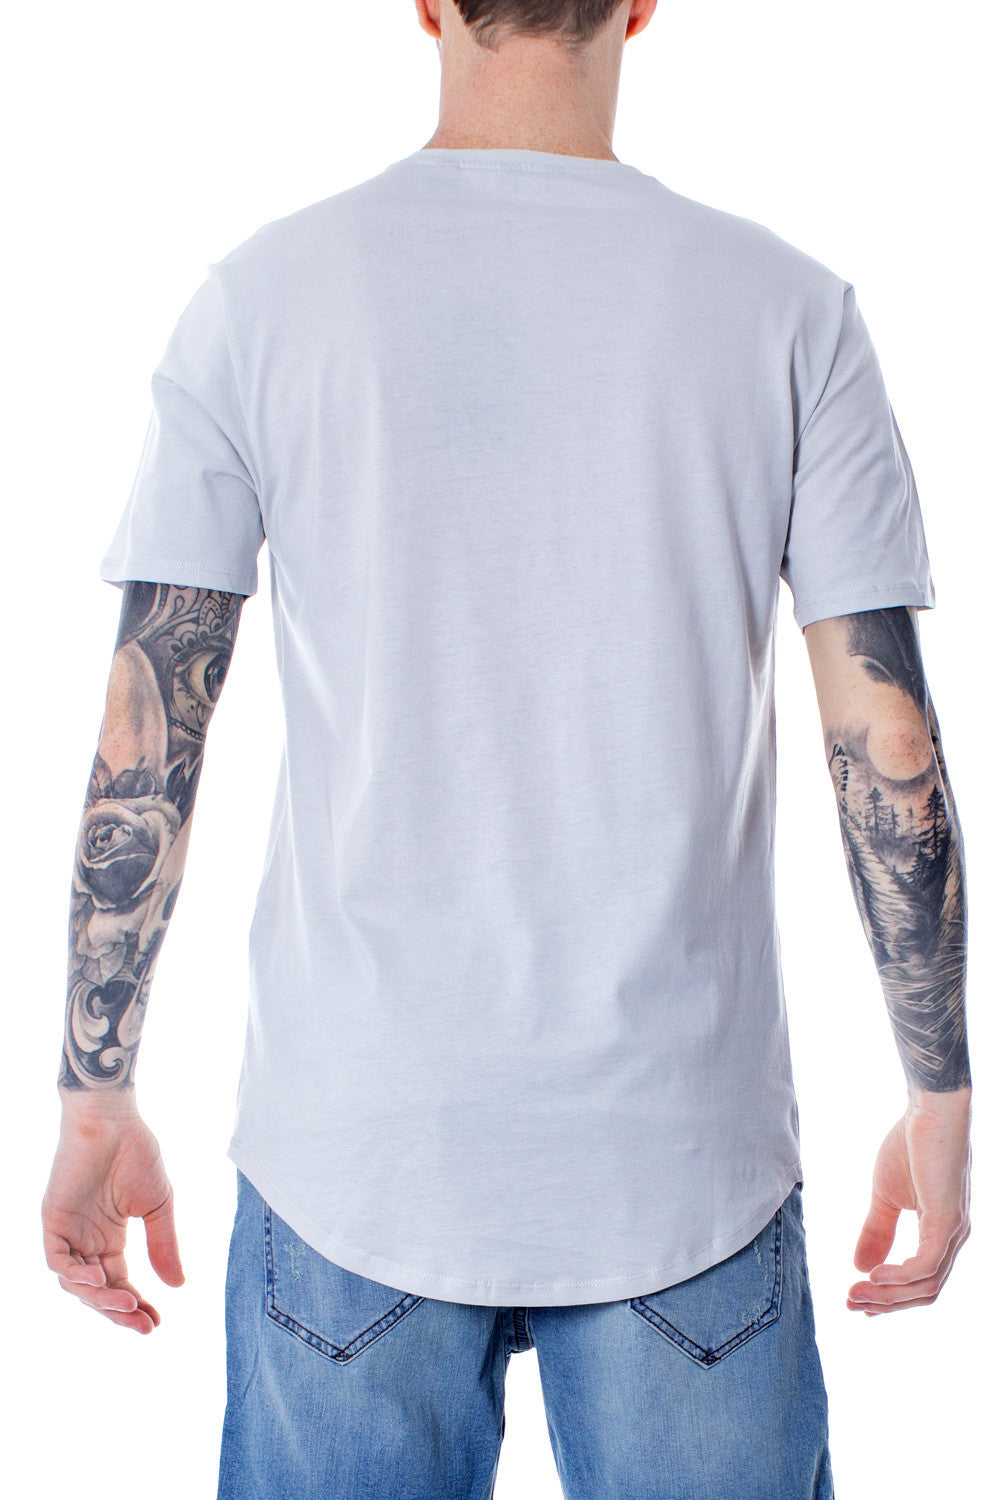 only & sons Only & Sons T-Shirt Uomo